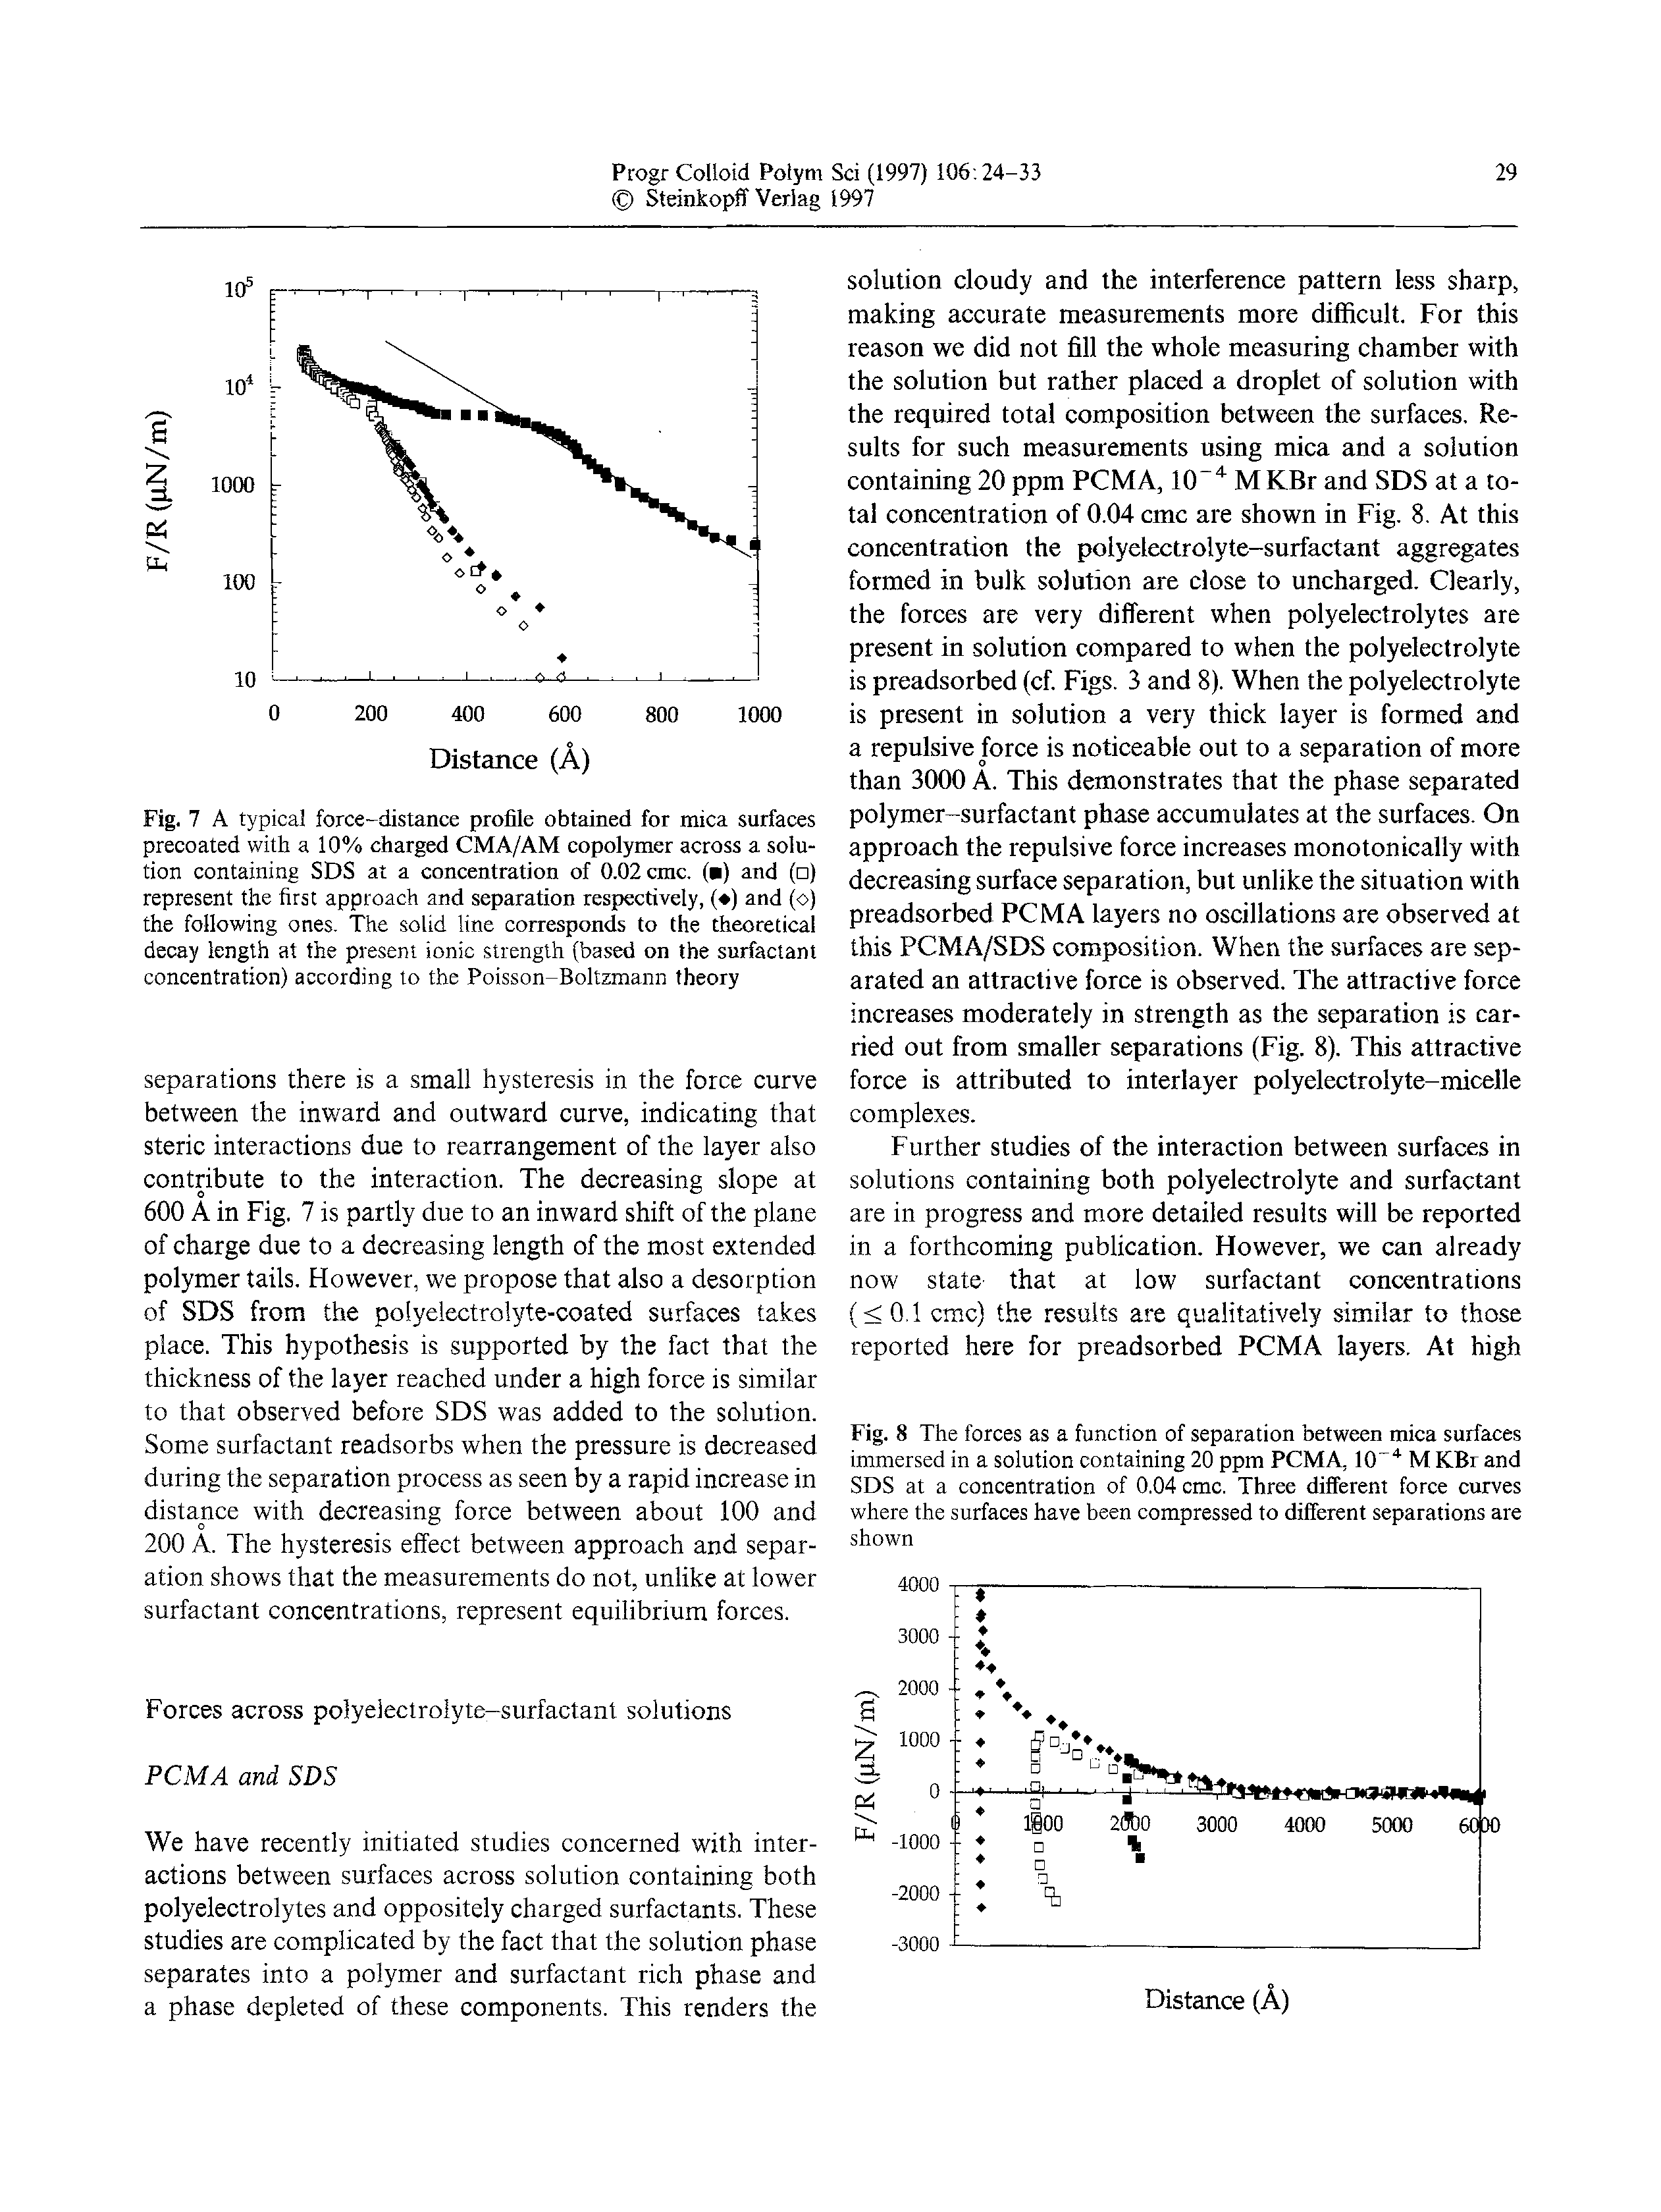 Fig. 7 A typical force-distance profile obtained for mica surfaces precoated with a 10% charged CMA/AM copolymer across a solution containing SDS at a concentration of 0.02 cmc. ( ) and ( ) represent the first approach and separation respectively, ( ) and (o) the following ones. The solid line corresponds to the theoretical decay length at the present ionic strength (based on the surfactant concentration) according to the Poisson-Boltzmann theory...